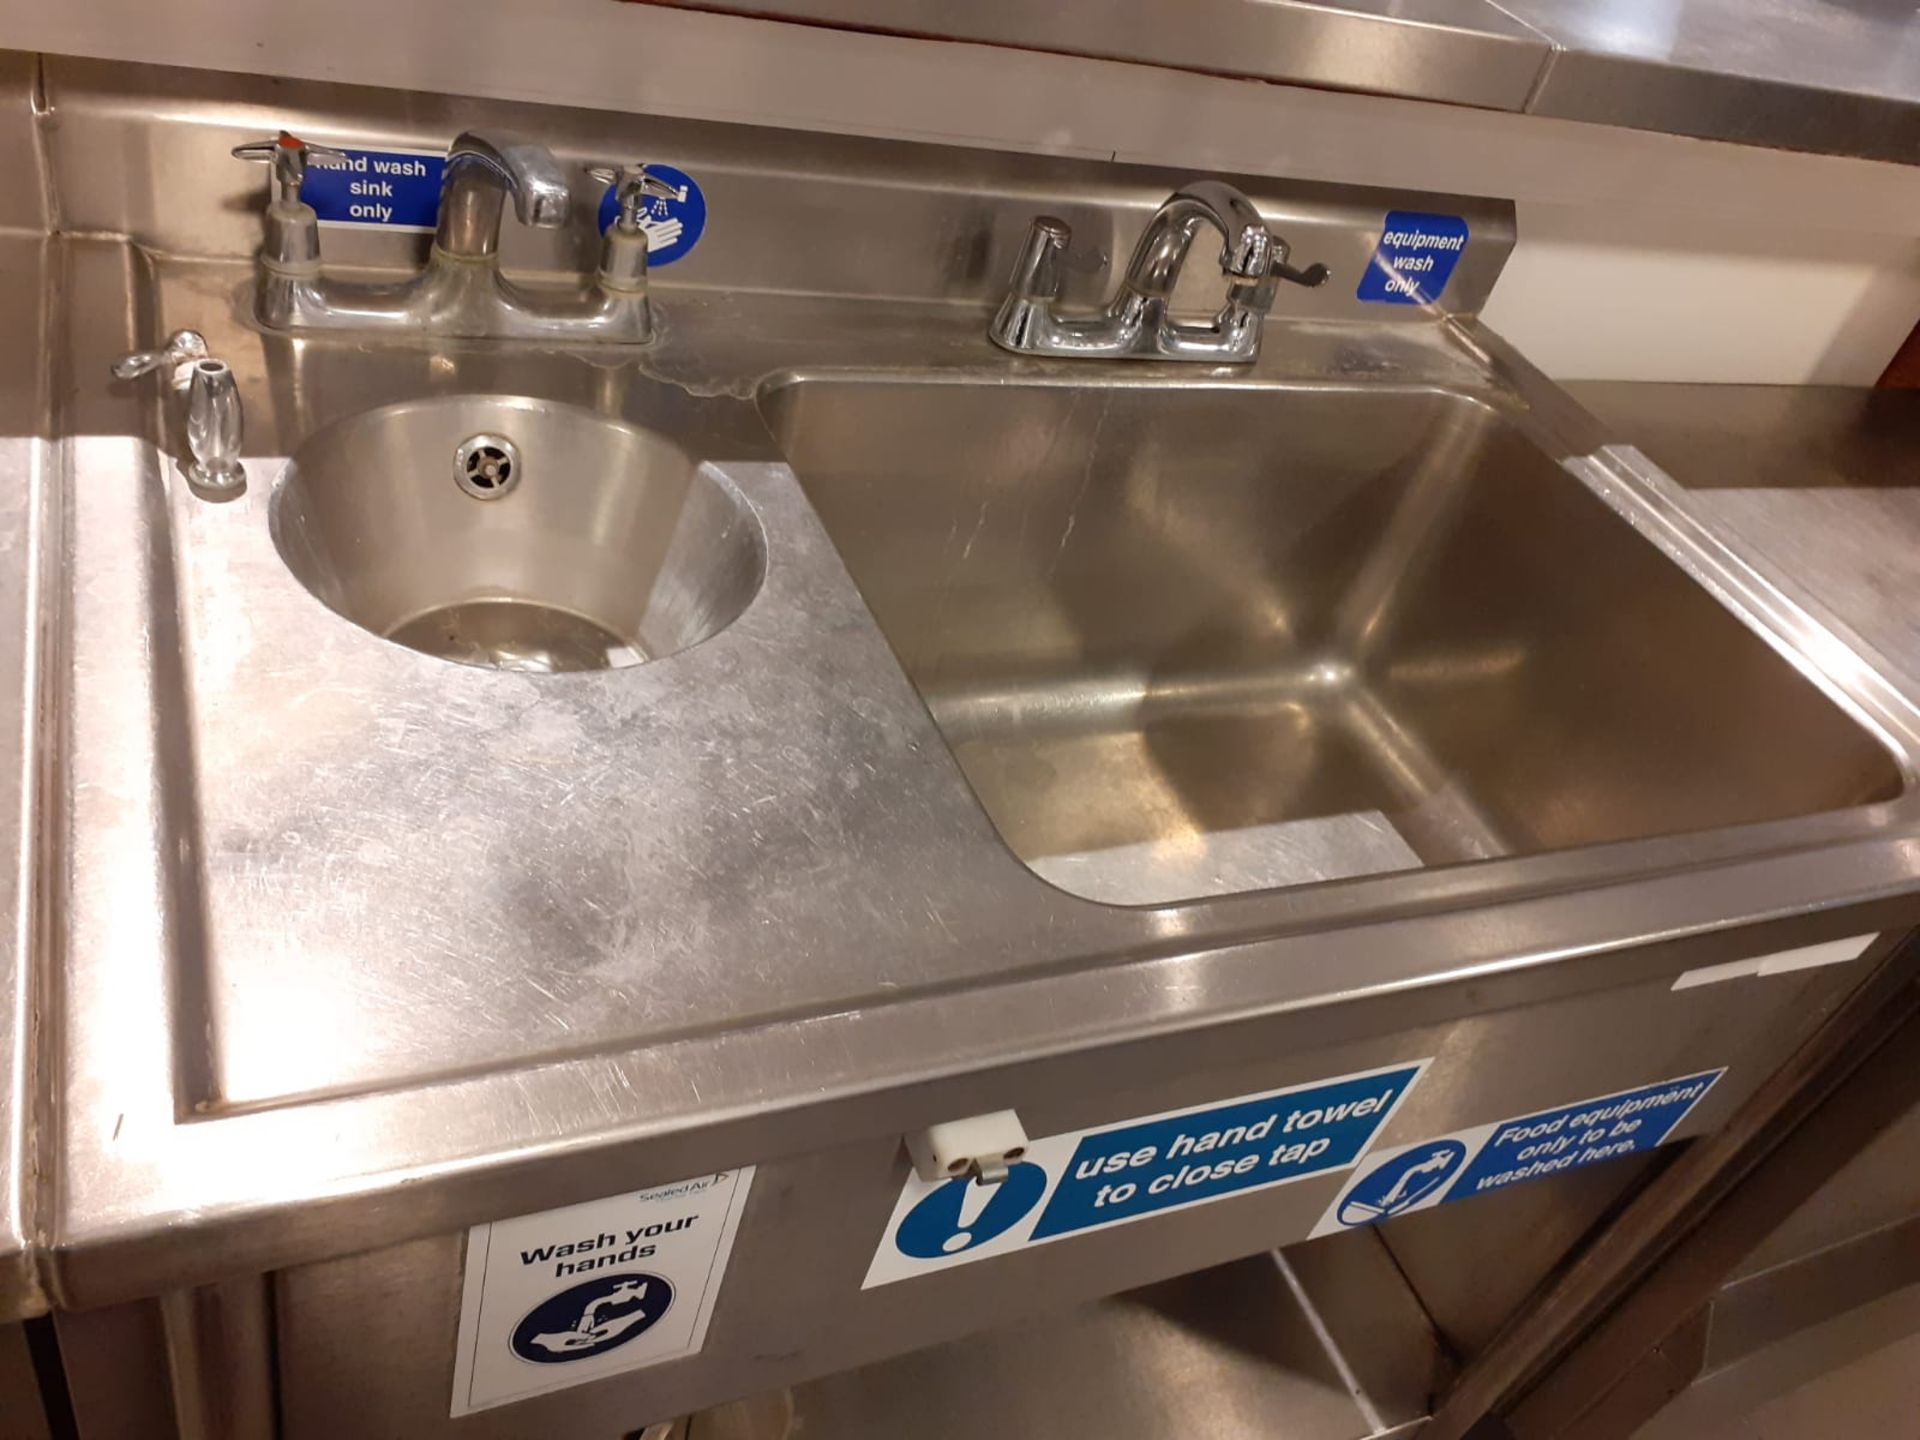 1 x Large Food Prep Sink Wash Unit With Mixer Taps and Hand Wash Basin - CL582 - Location: London - Image 3 of 5